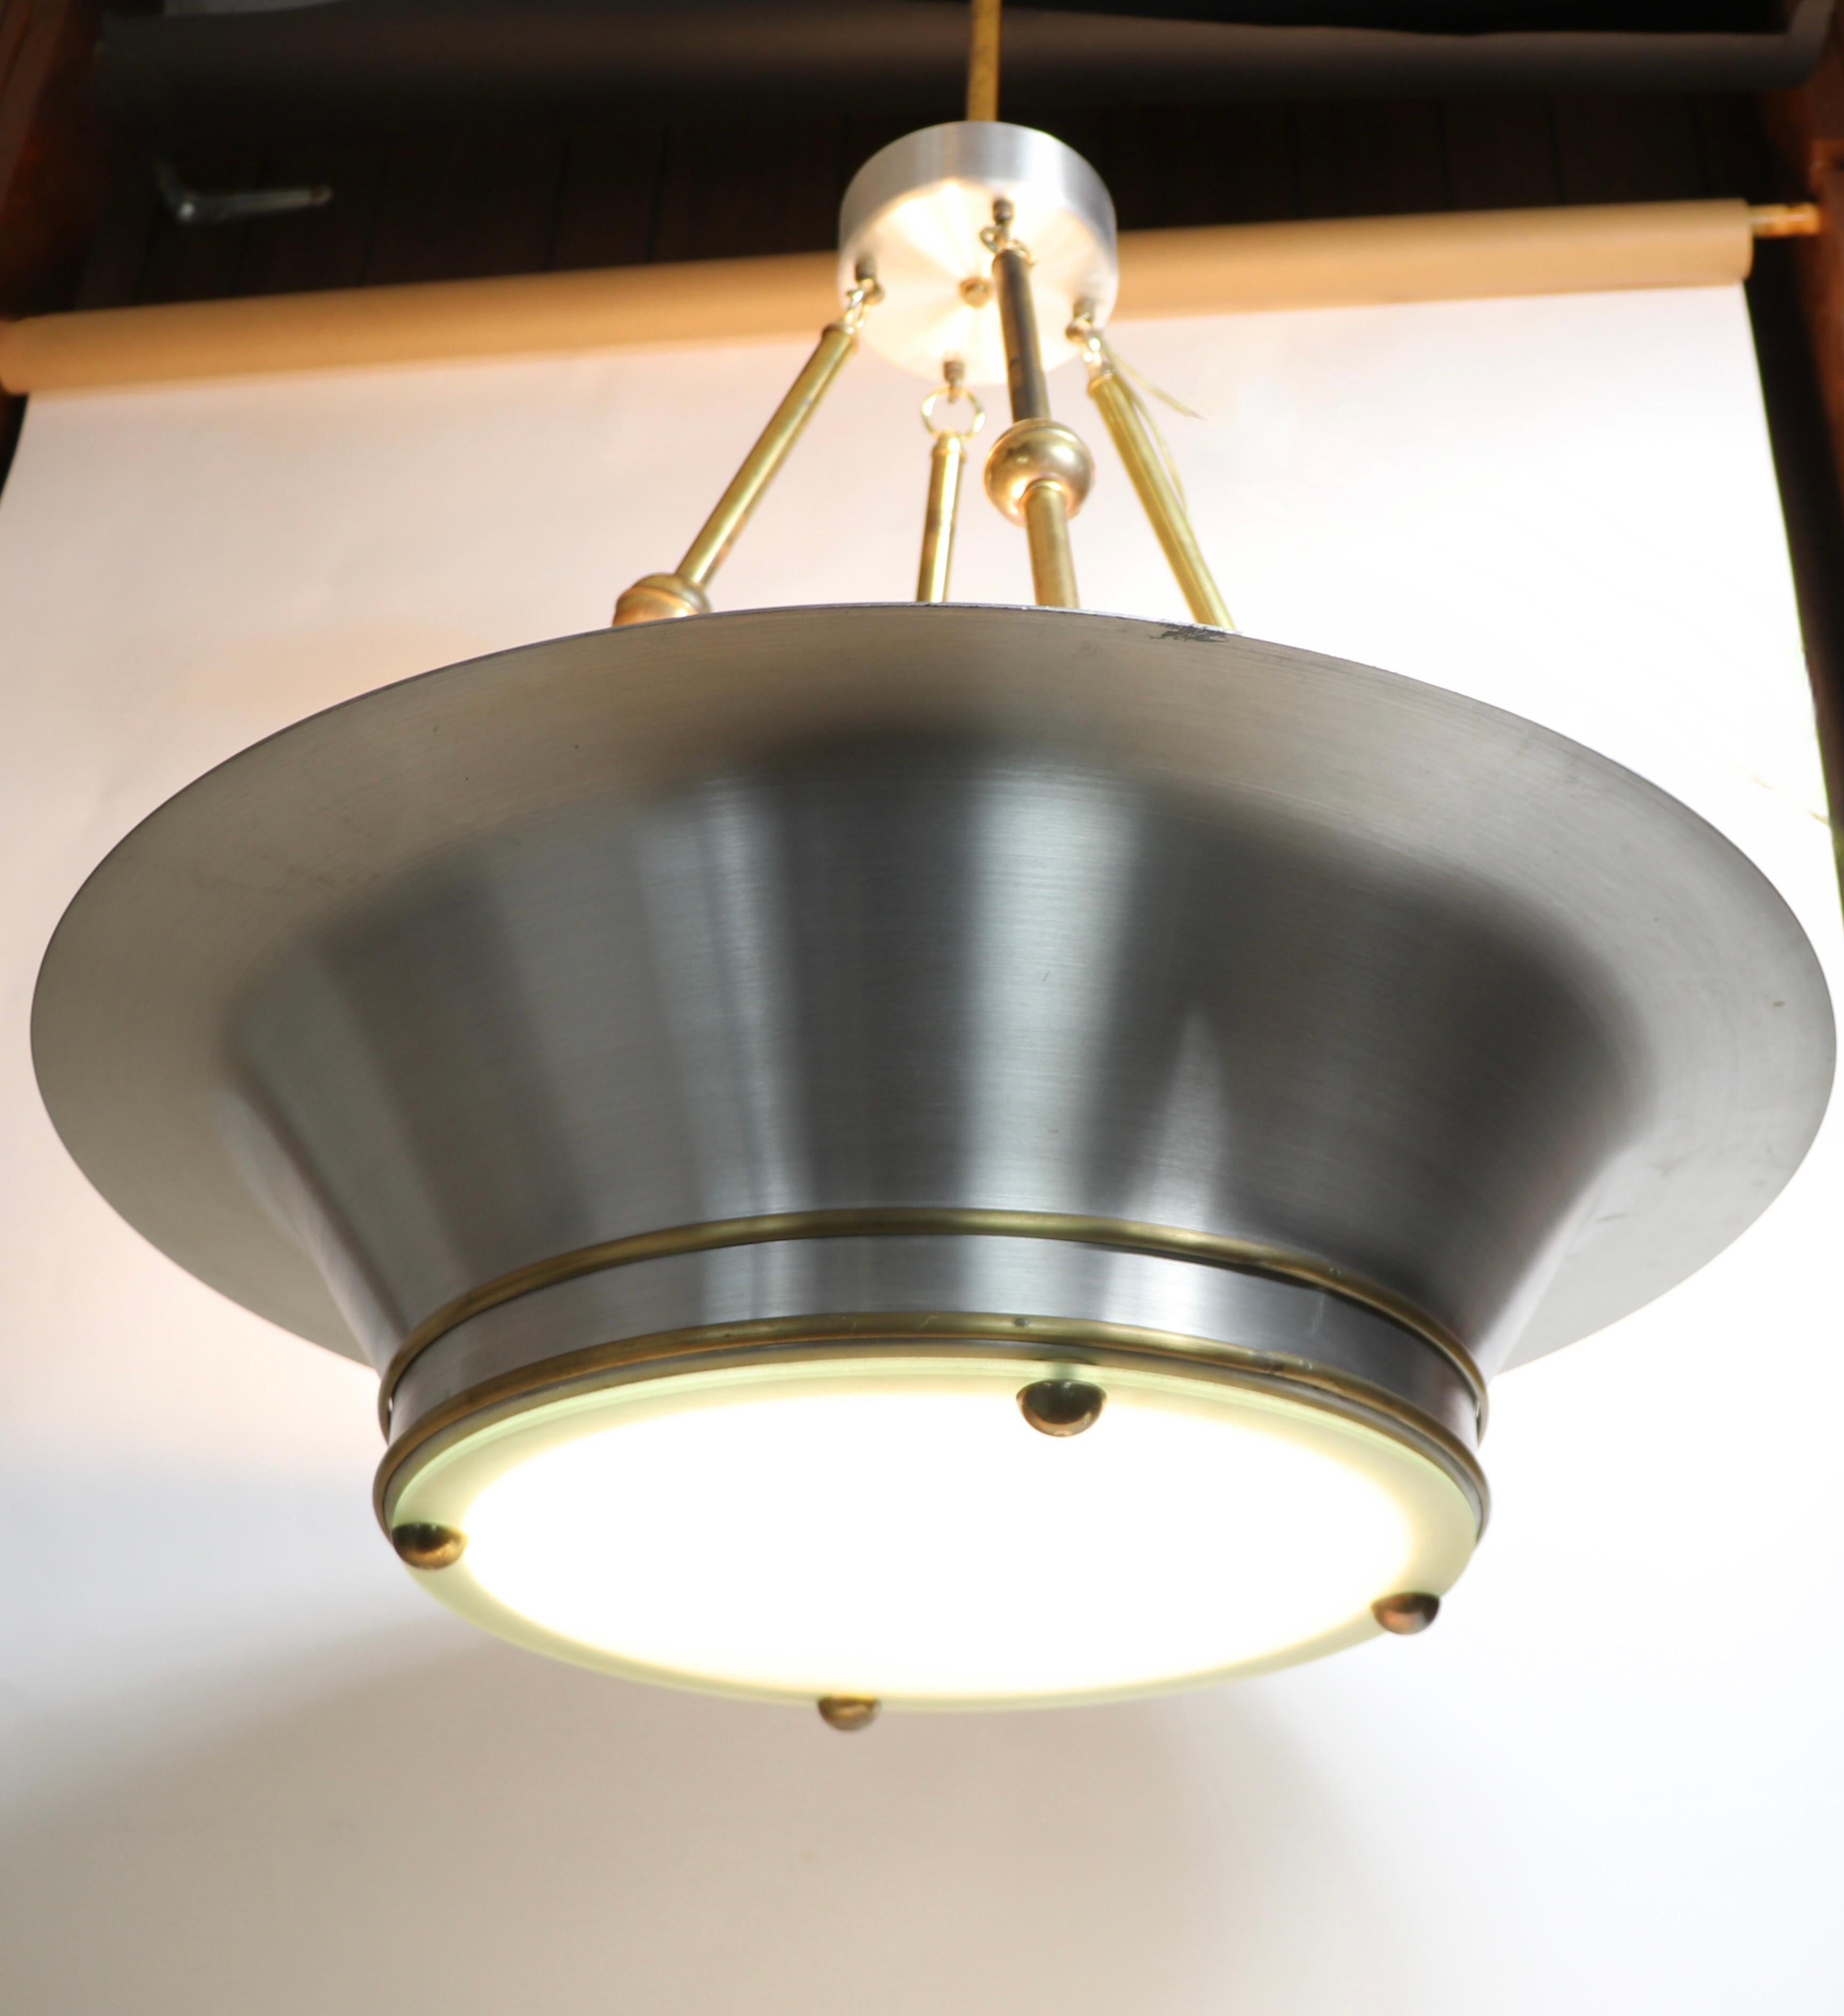 Large and impressive spun aluminum, frosted glass, and brass chandelier, in the Machine Age, Hollywood Regency, Art Deco style, made in the USA circa 1980's. 
 The circular aluminum fixture measures 31 inch in diameter x 17 inch height without the